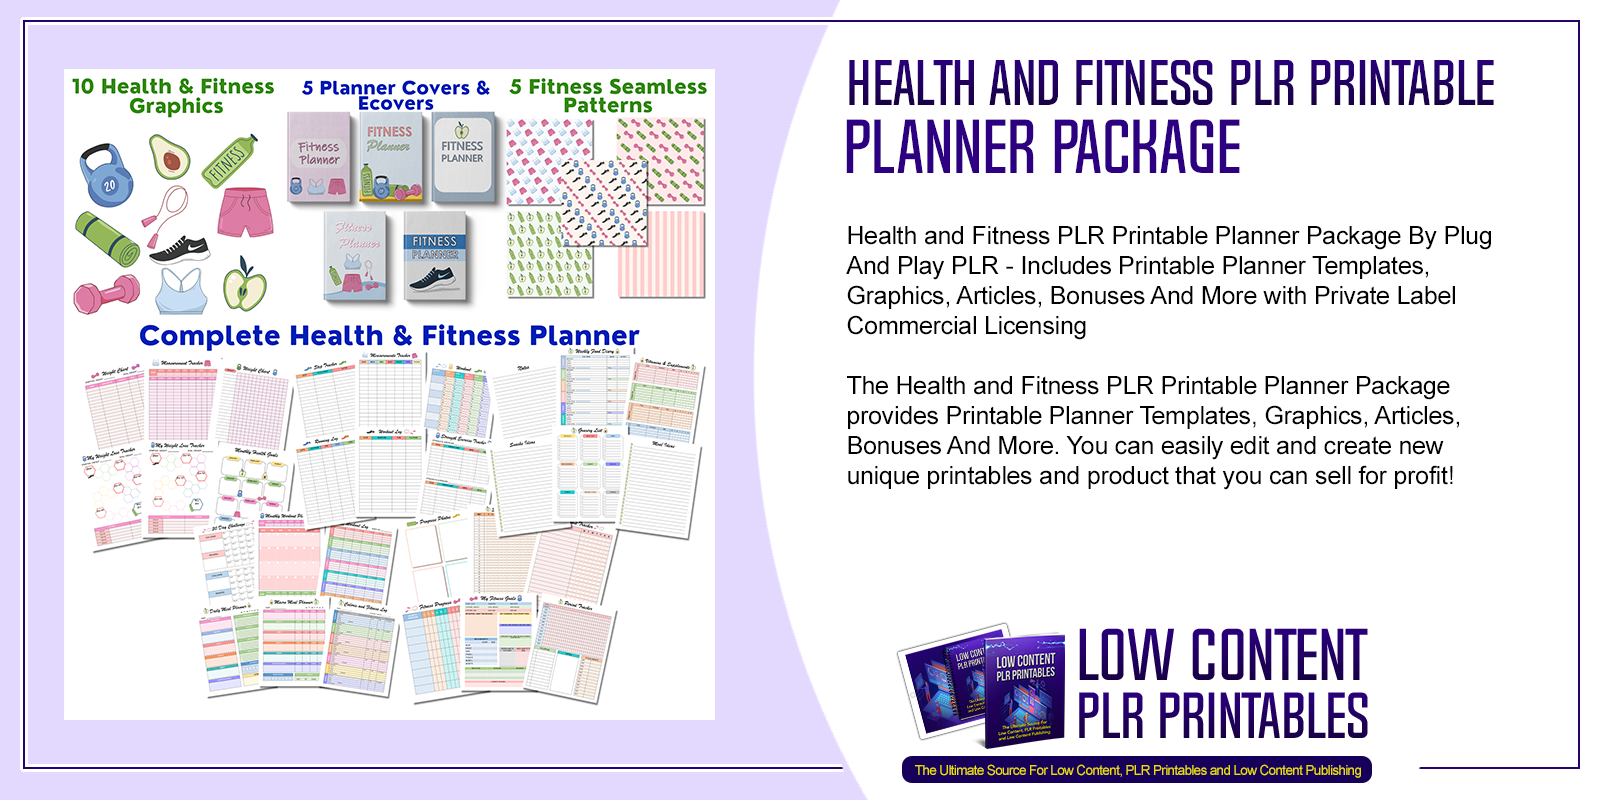 Health and Fitness PLR Printable Planner Package 2